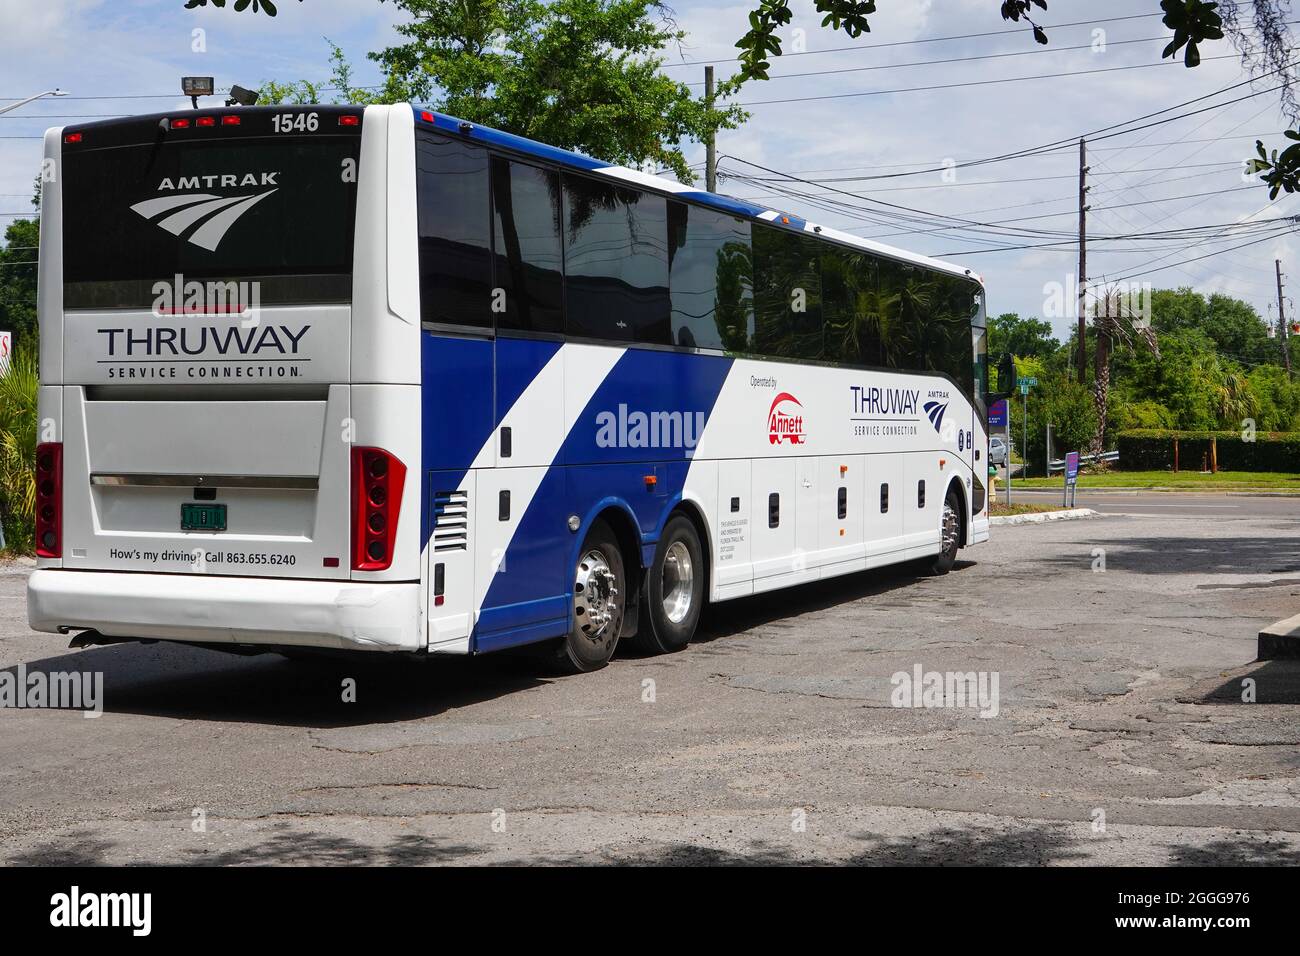 Amtrak bus parked in the Greyhound parking lot. Connection to the Jacksonville train station for cities of Ocala, Gainesville, and Waldo, Florida. Stock Photo